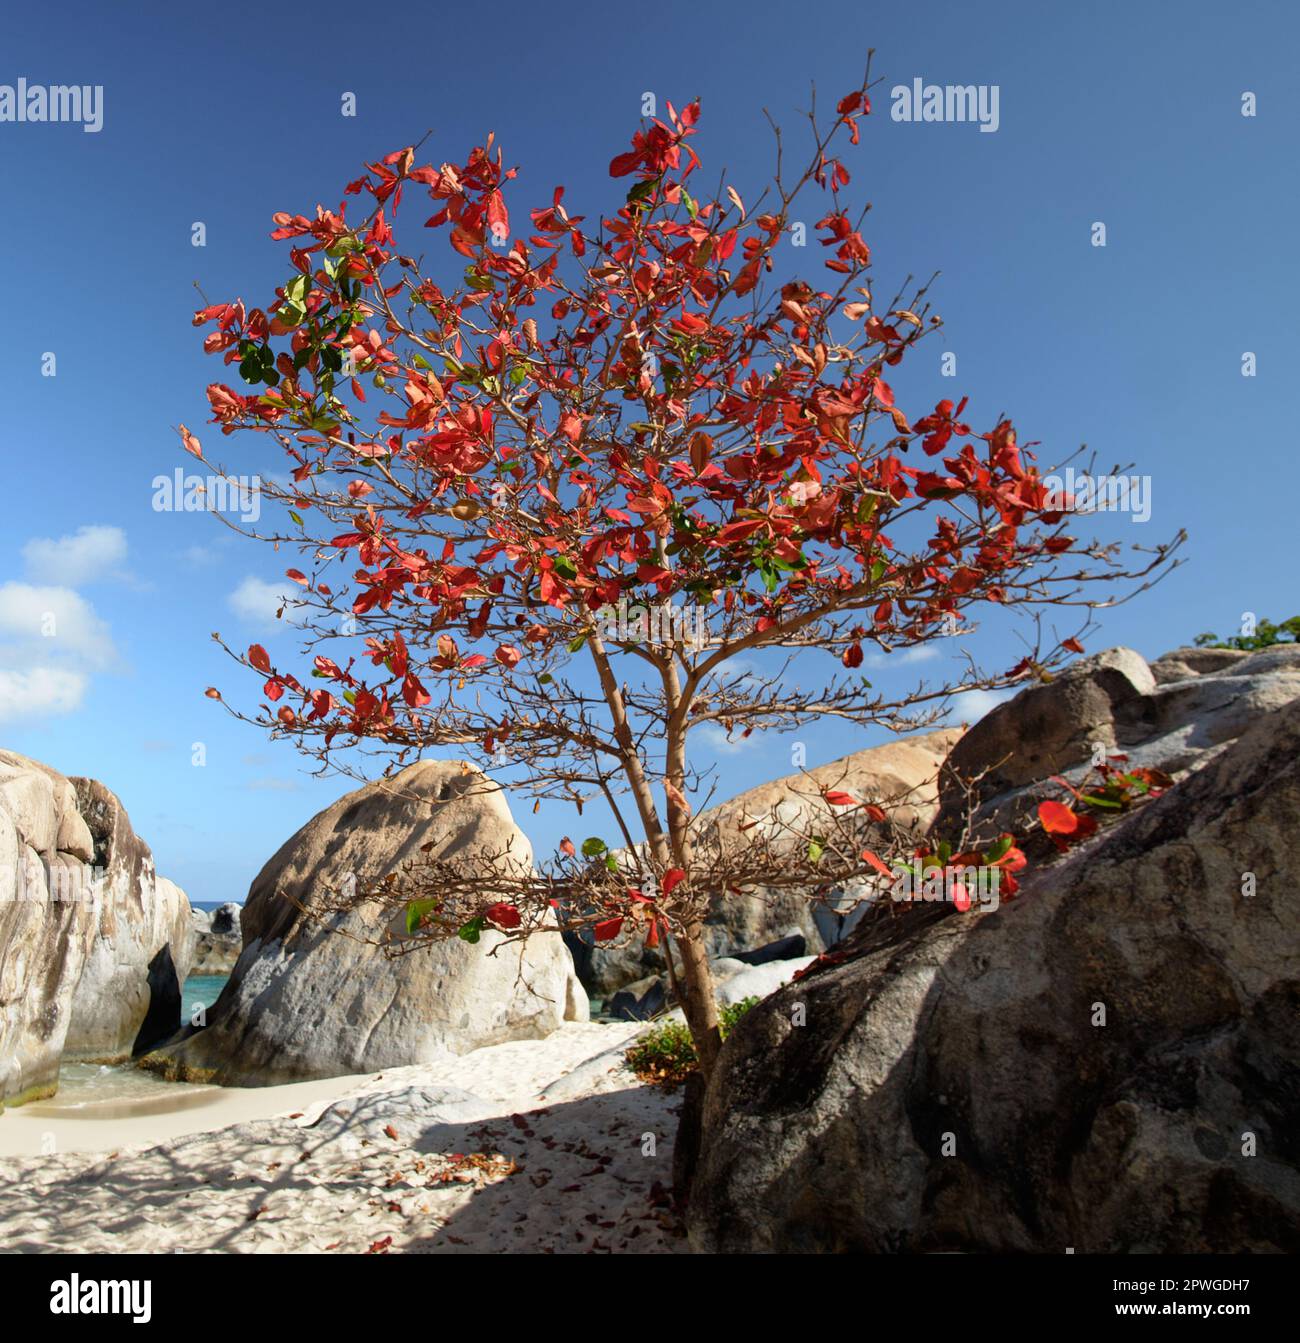 A seagrape tree (Coccoloba uvifera) with leaves turning red at Spring Bay, Virgin Gorda, BVI Stock Photo